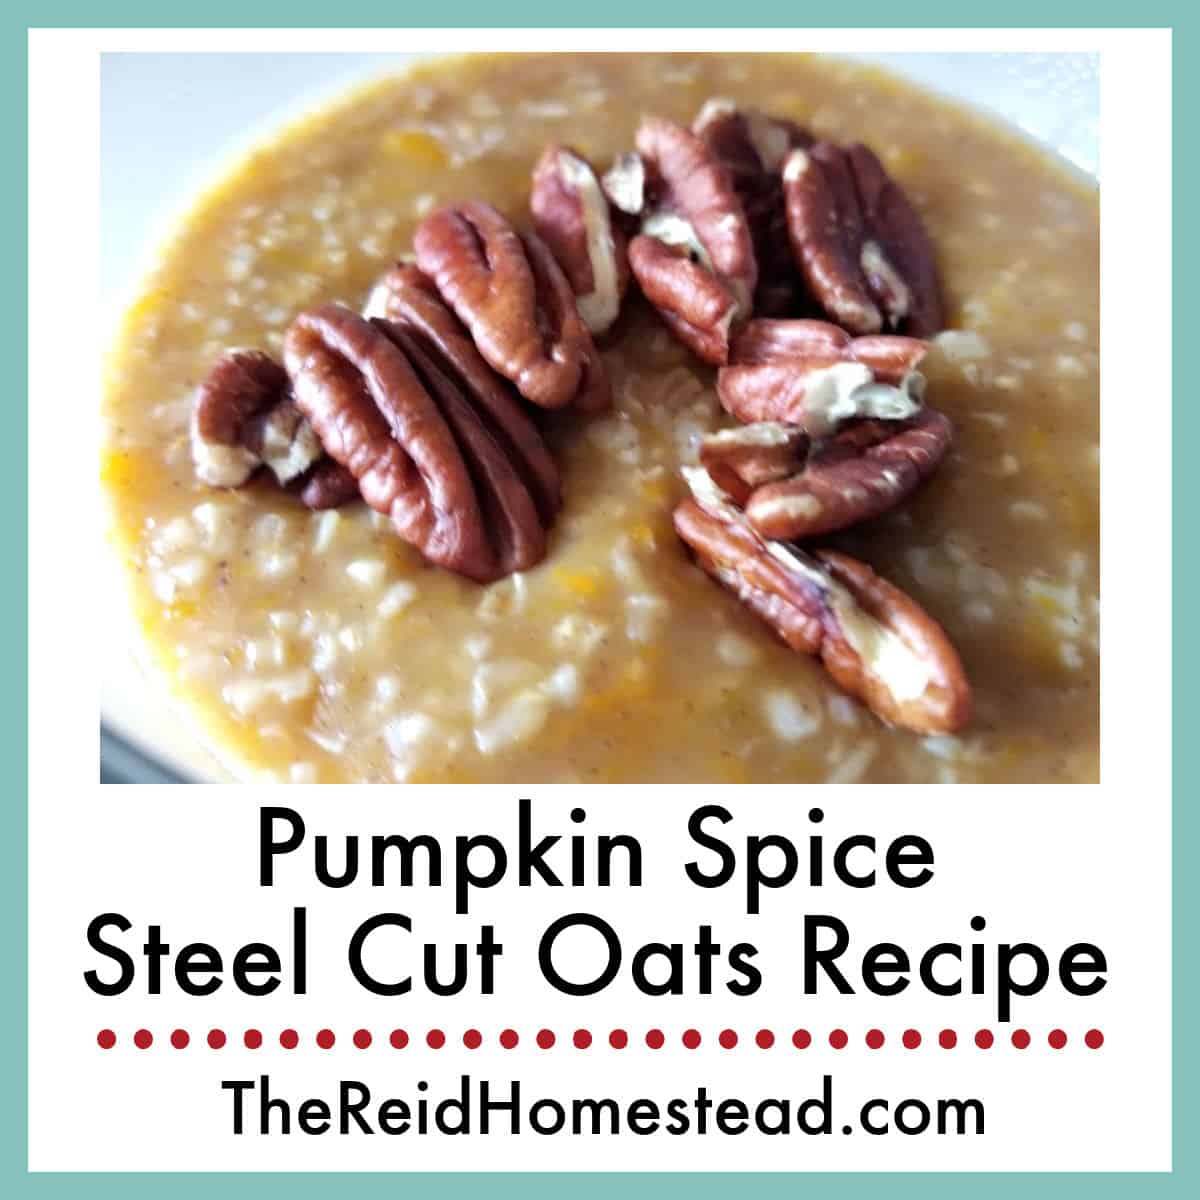 close up of a bowl of pumpkin spice steel cut oats with pecans on top, text overlay Pumpkin Spice Steel Cut Oats Recipe